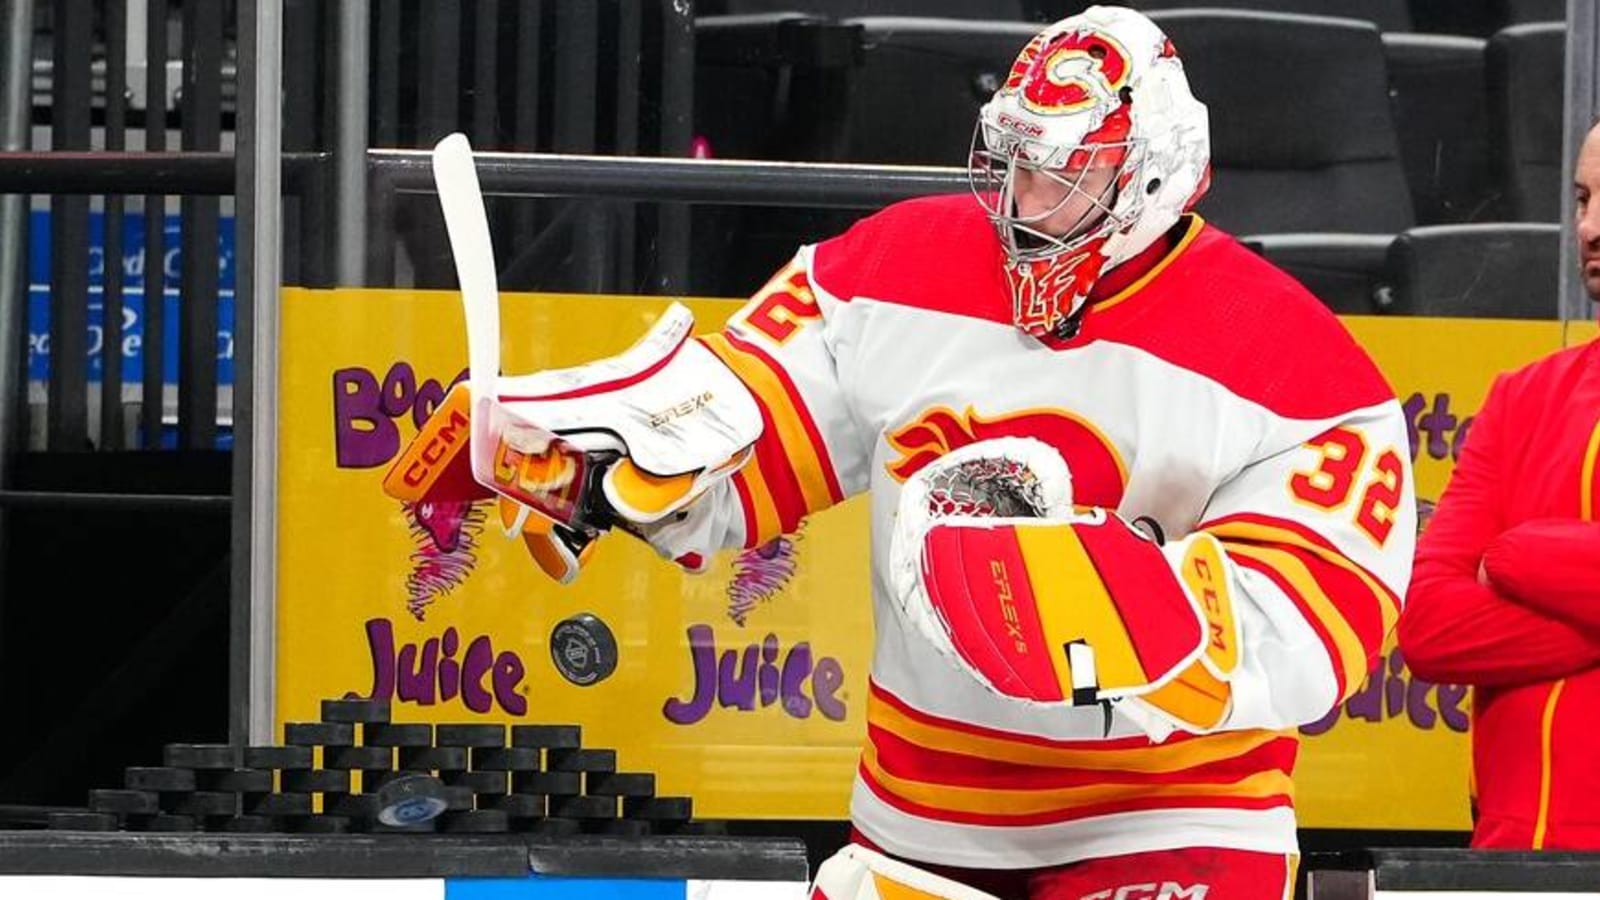 Calgary Flames place goalie Dan Vladar on injury reserve list, recall Dustin Wolf from the AHL’s Wranglers